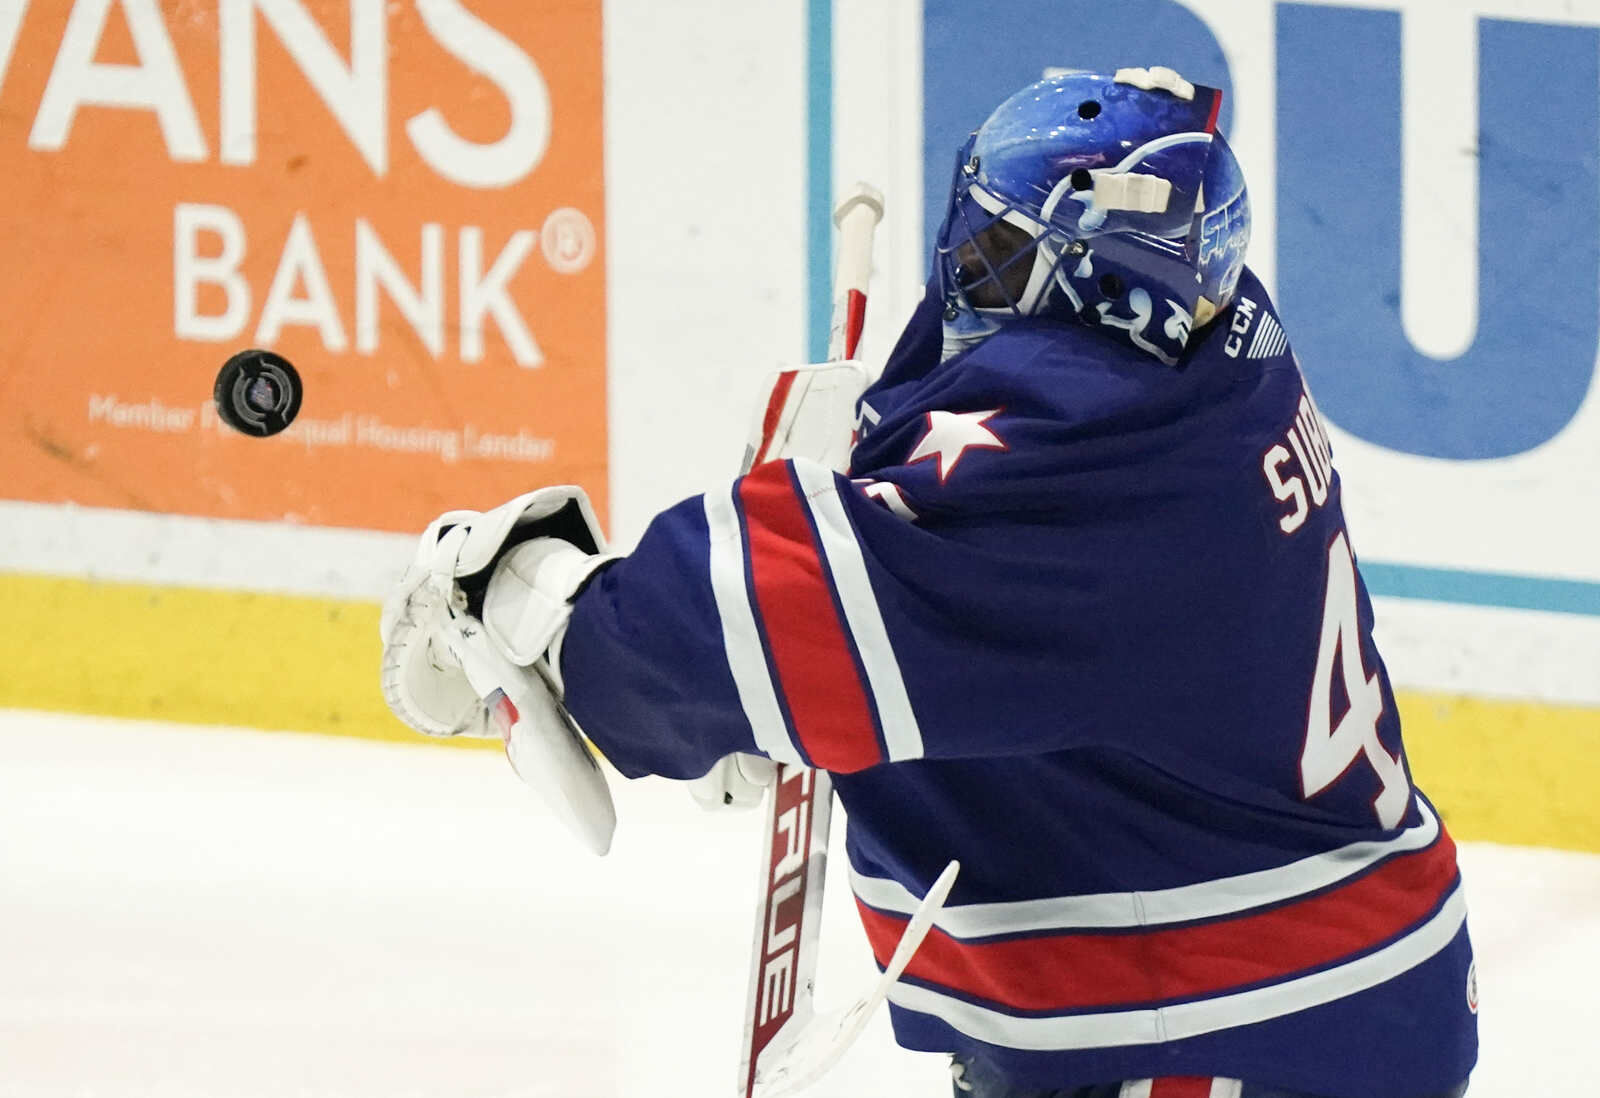 Rochester Americans hosting another playoff game in June